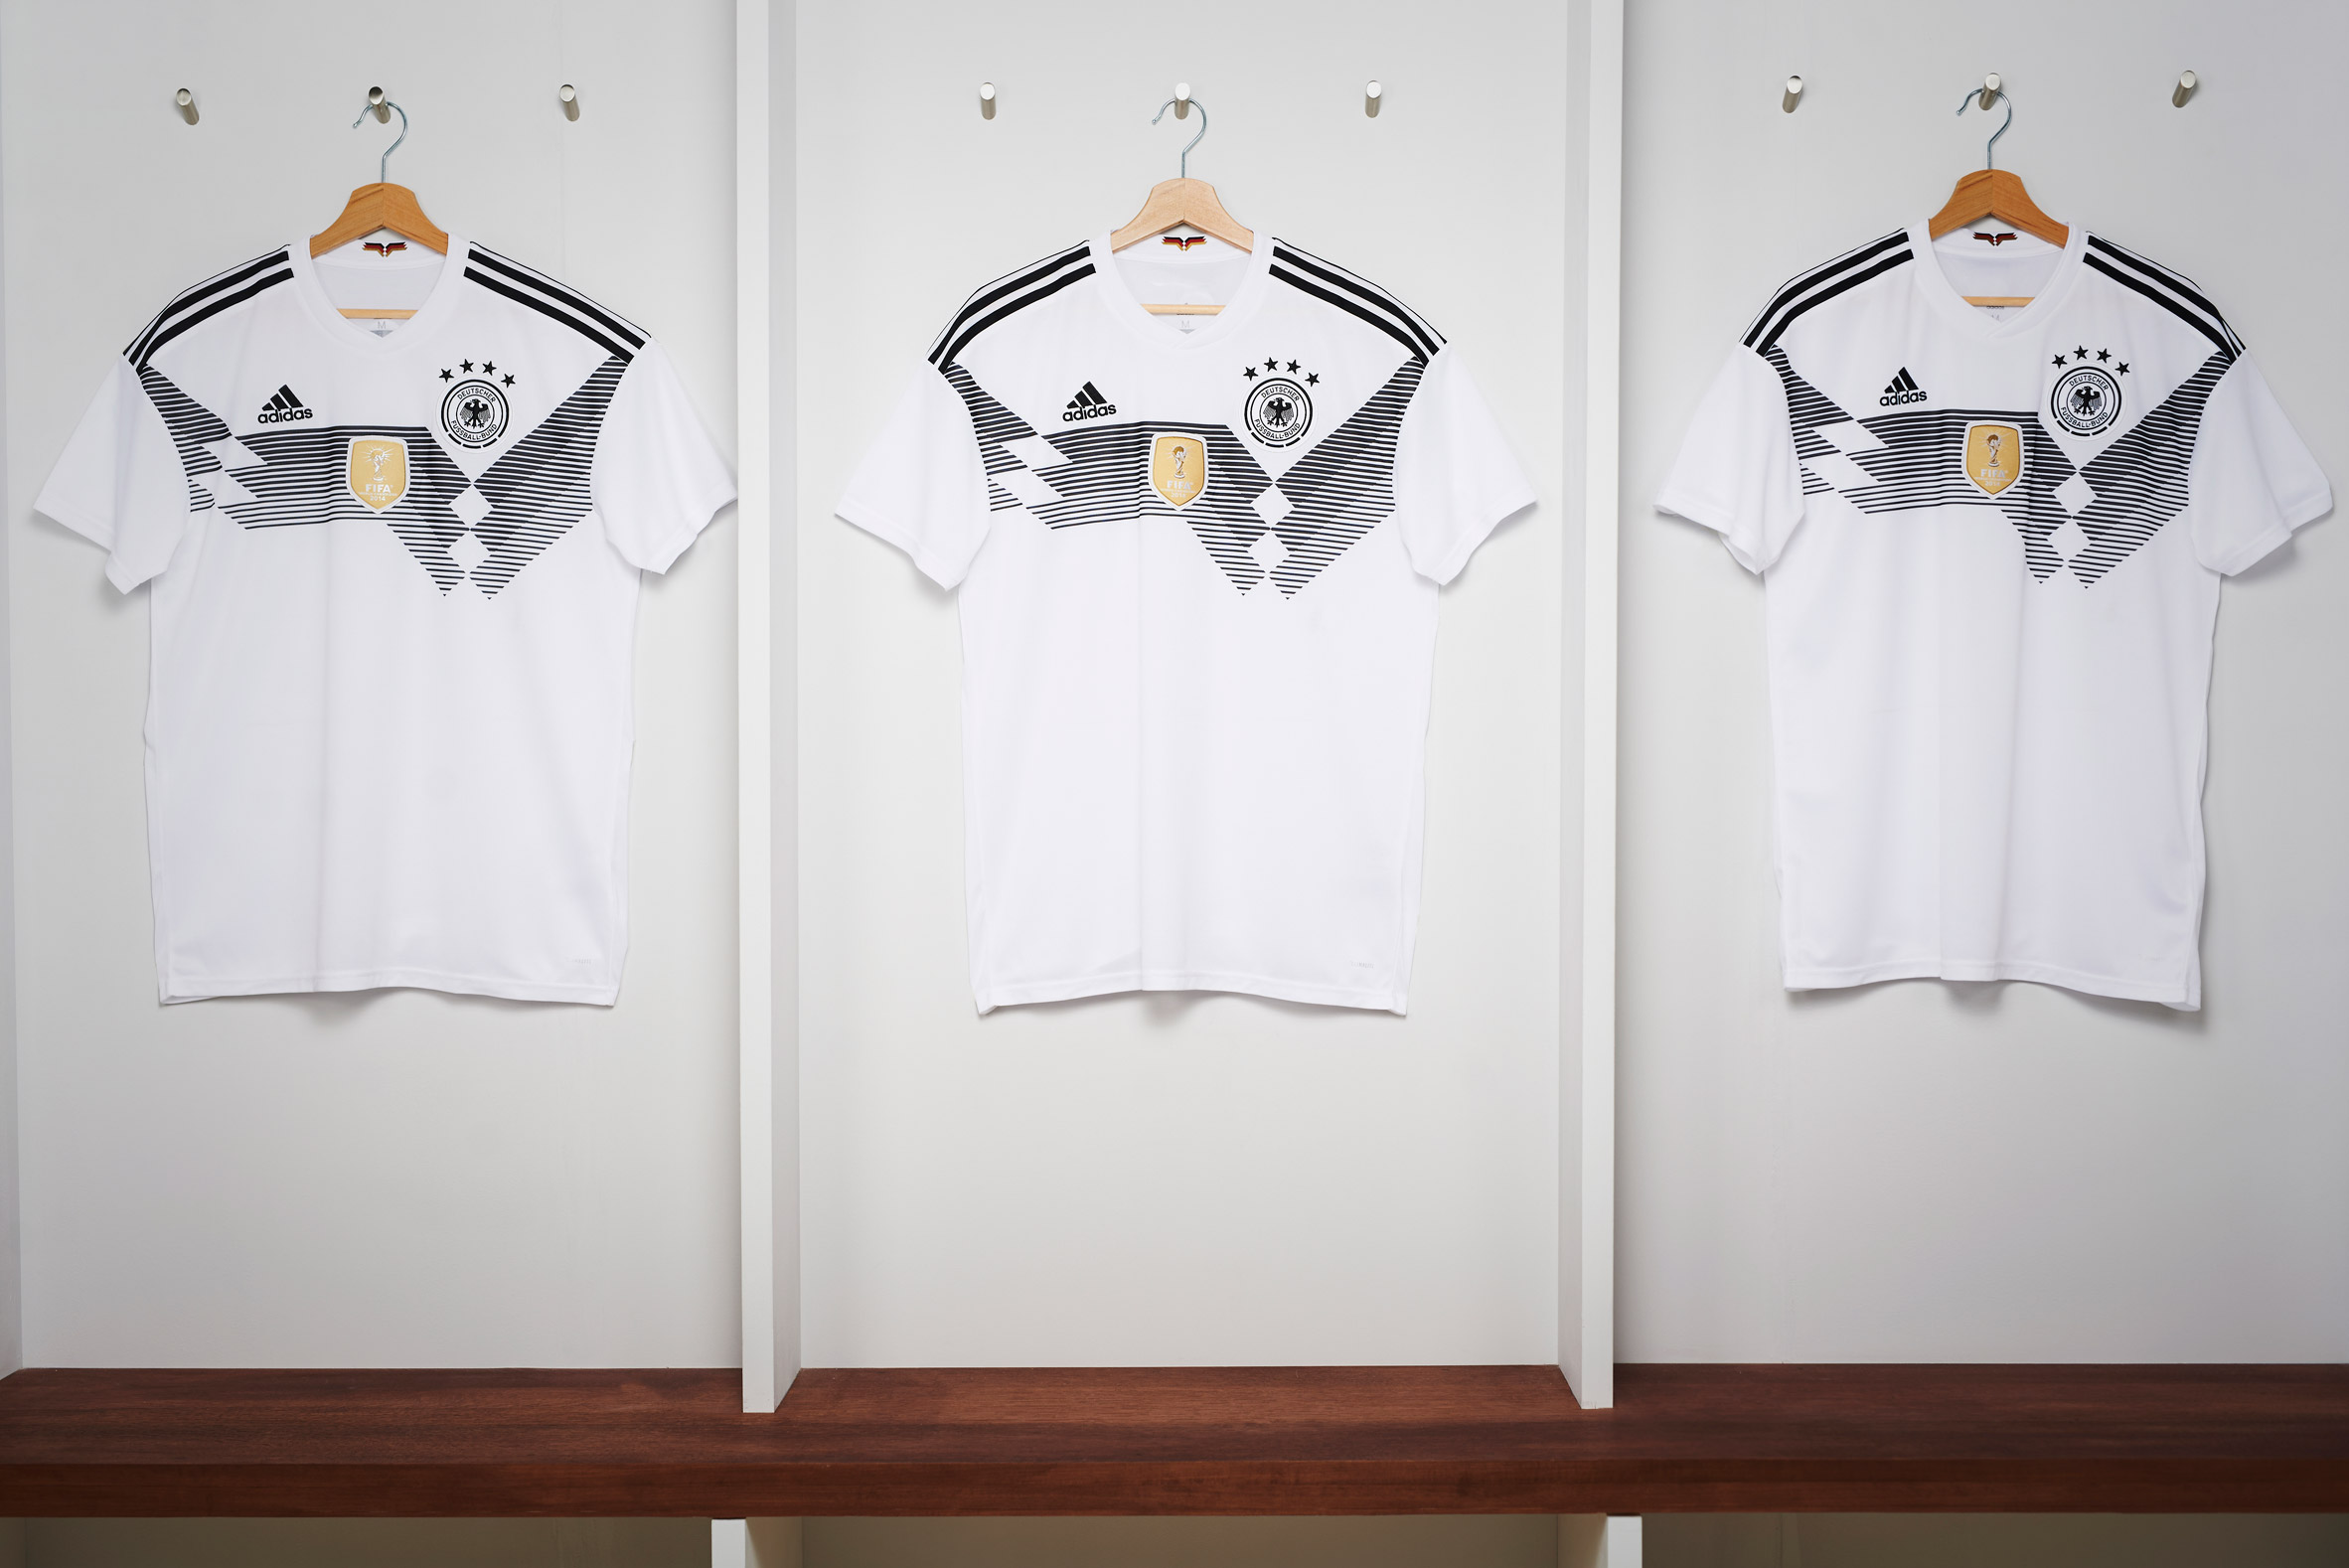 Adidas unveils World Cup kits that pay homage to classic football shirts